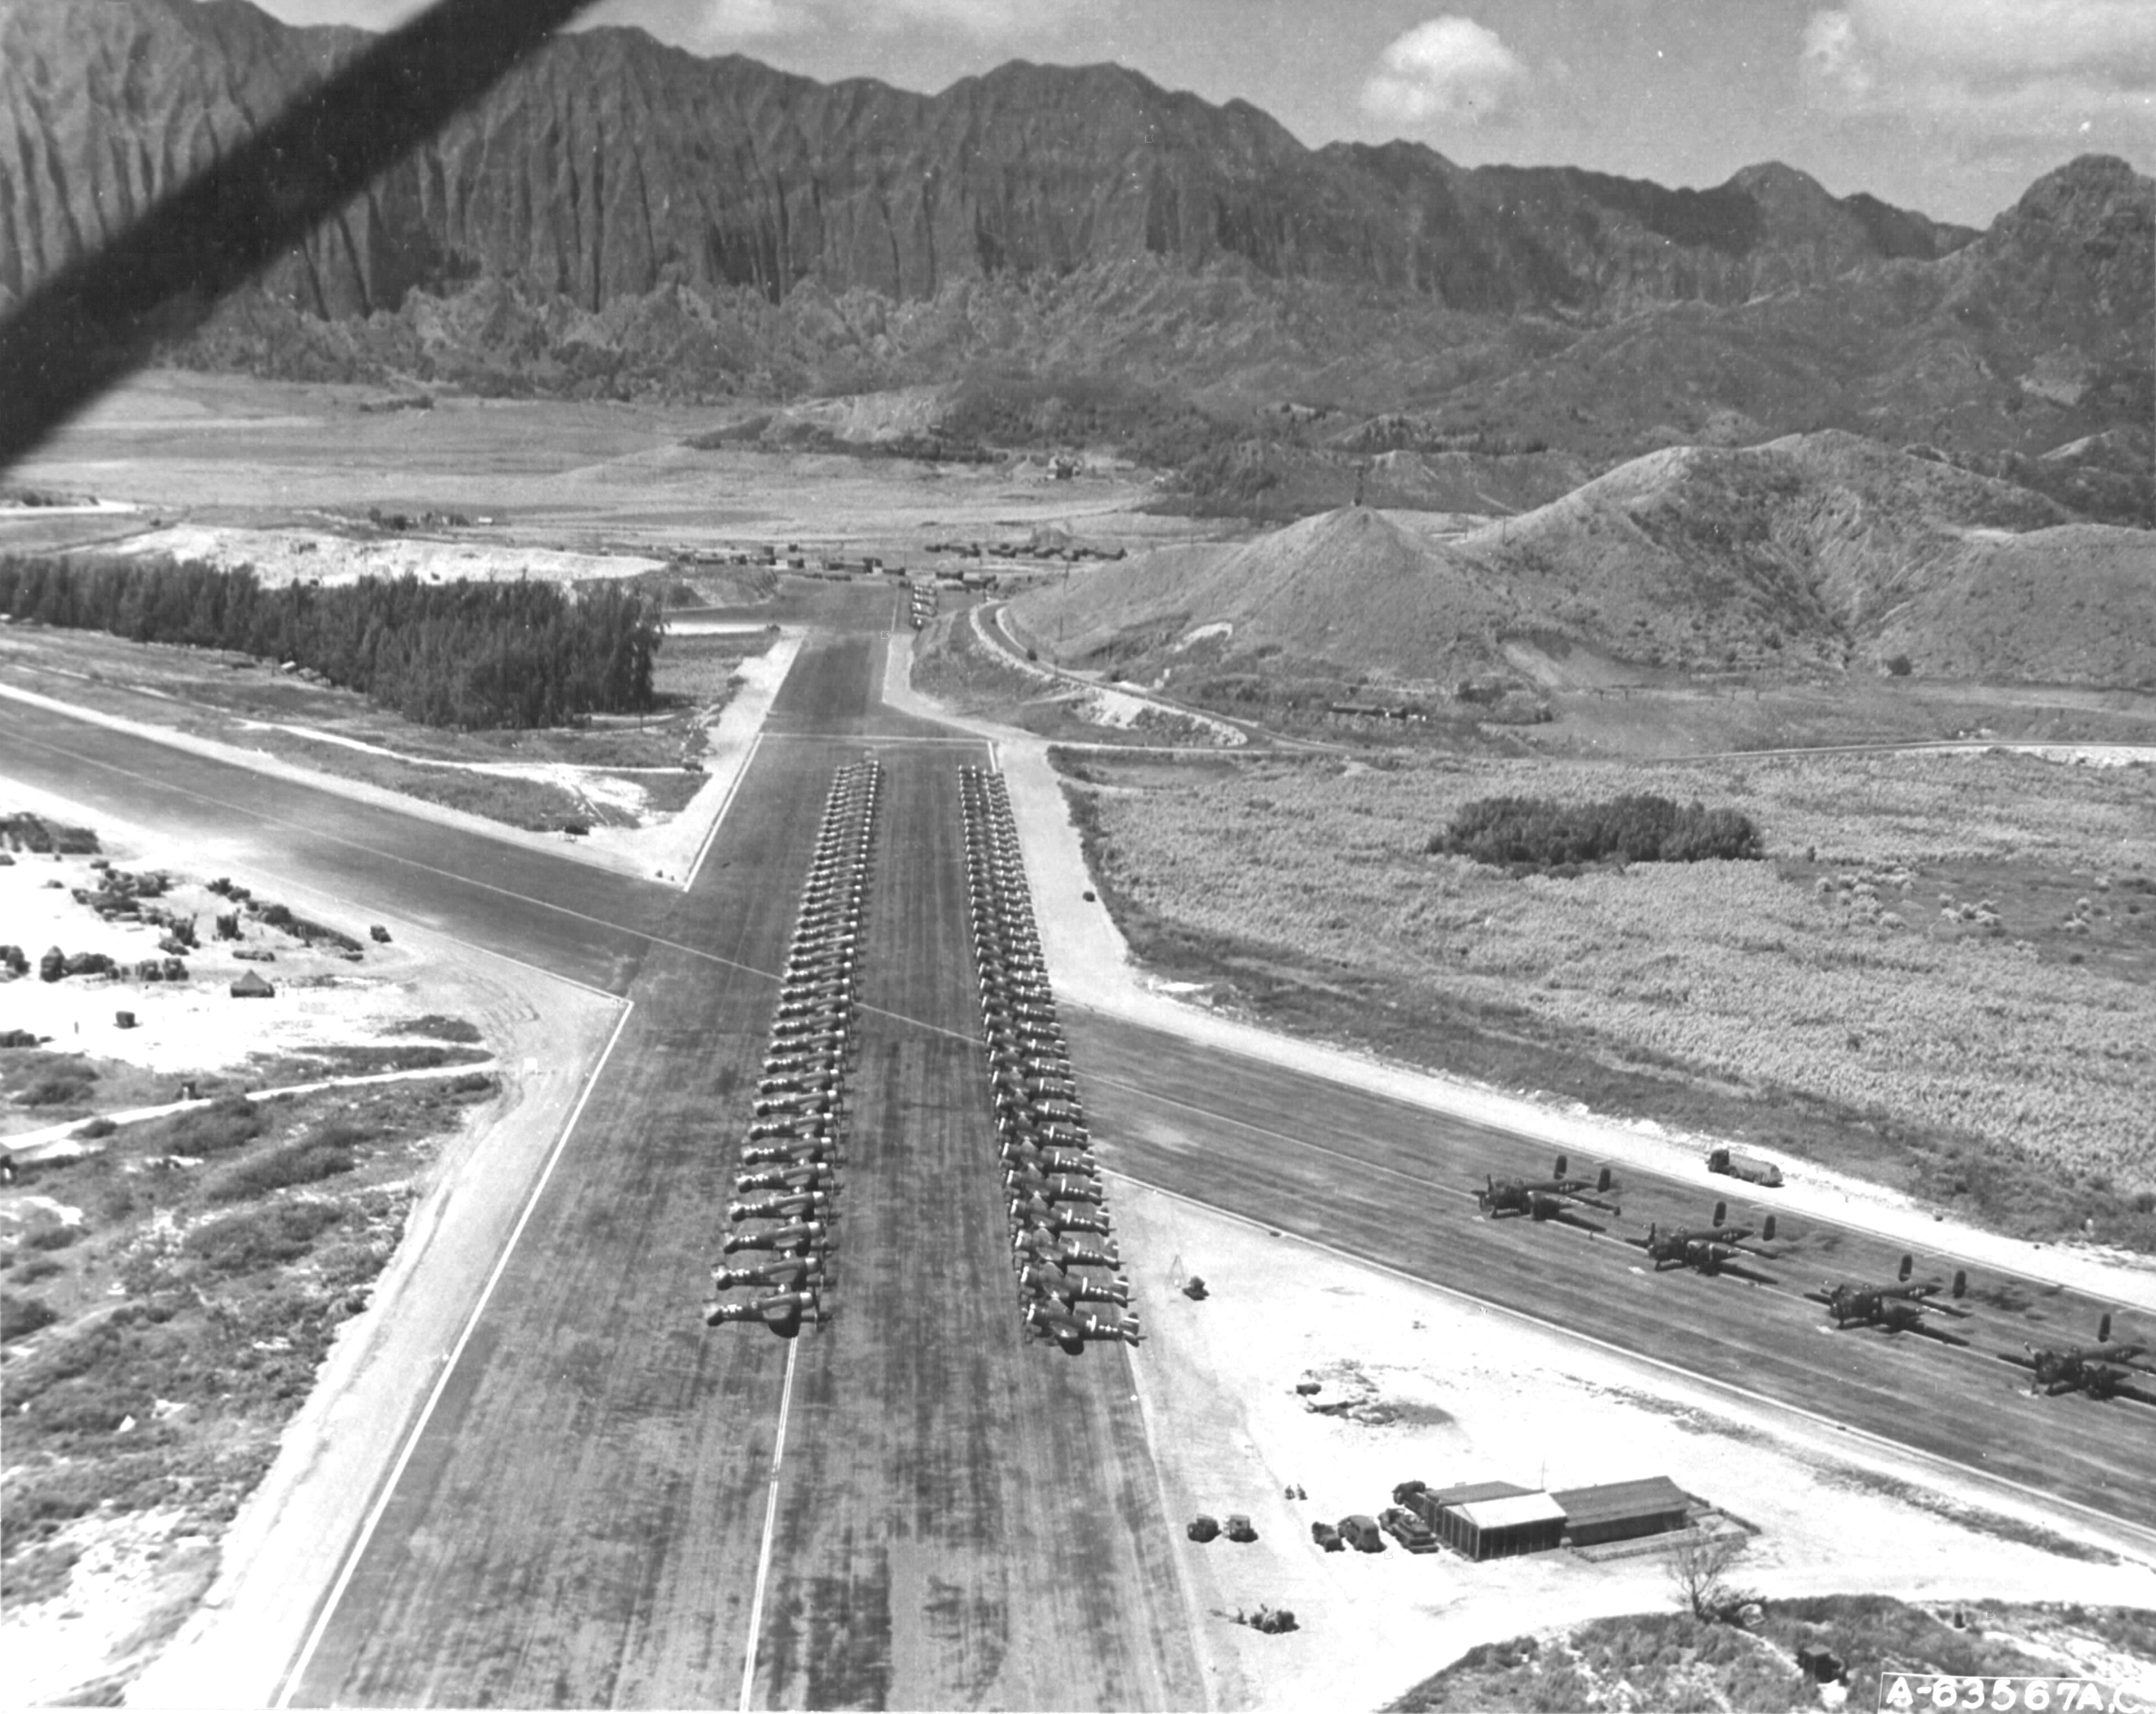 P-47 Thunderbolt aircraft of the 318th Fighter Group lined up for an inspection at Bellows Field, Oahu, US Territory of Hawaii, 15 May 1944. Photo 3 of 8.